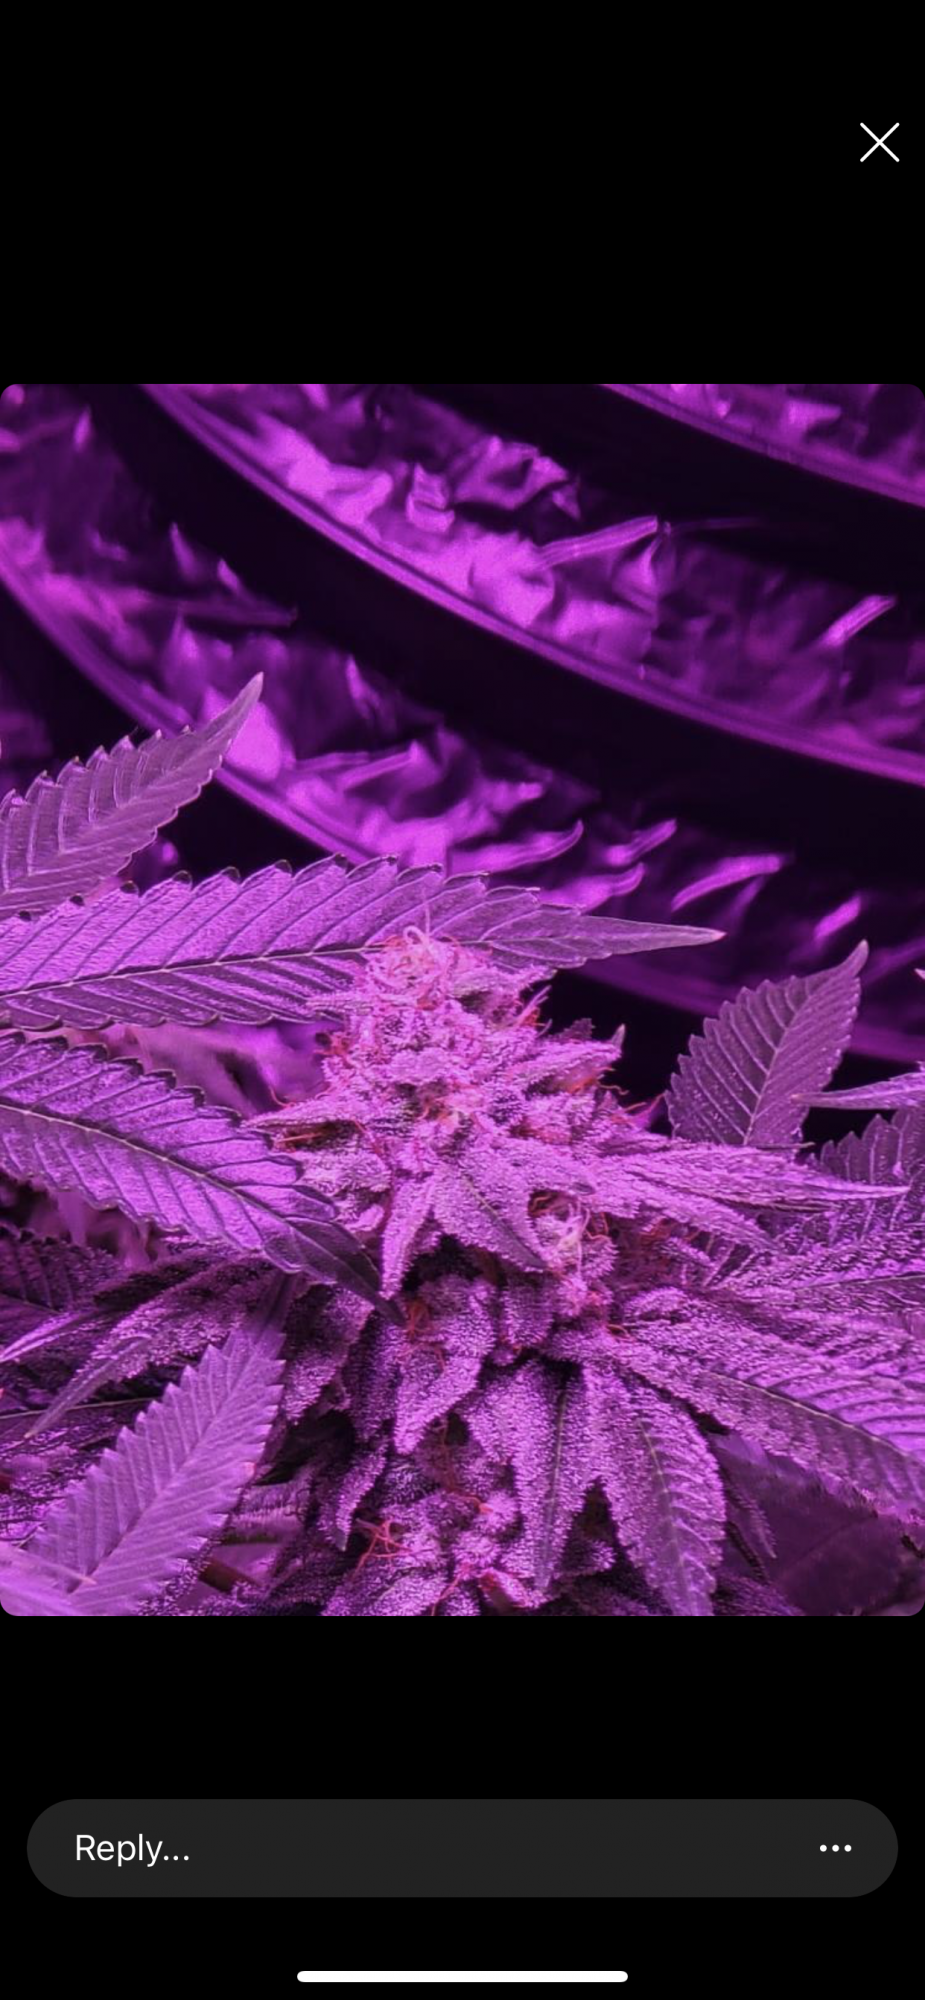 Most pistils are amber only 6 weeks in flower 4